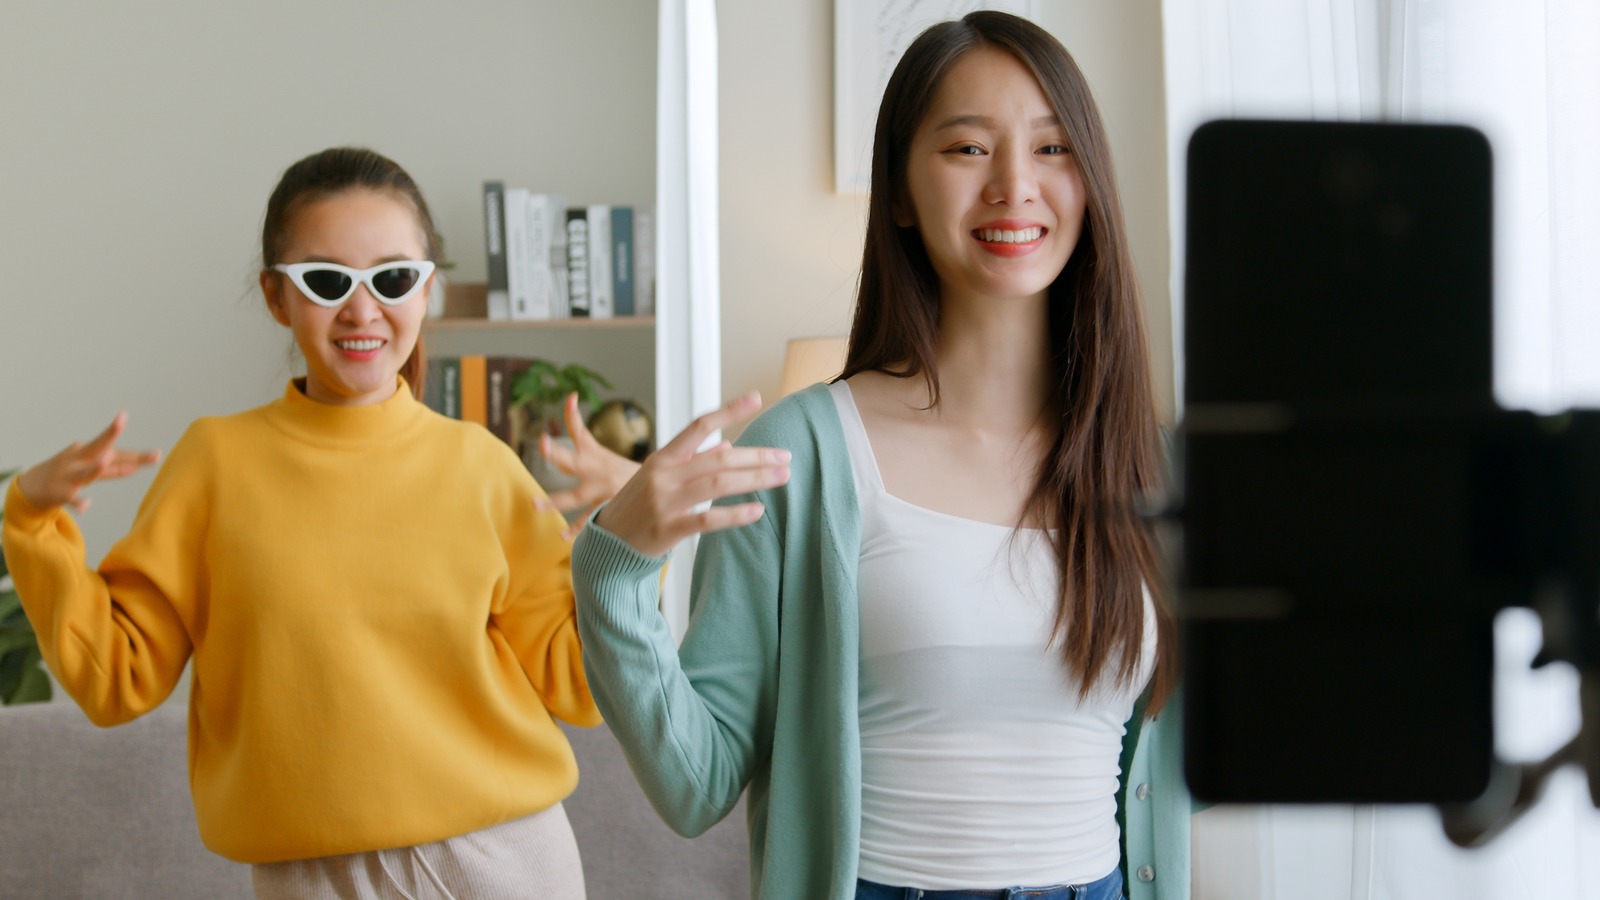 8 Viral TikTok Fashion Trends to Try This Summer